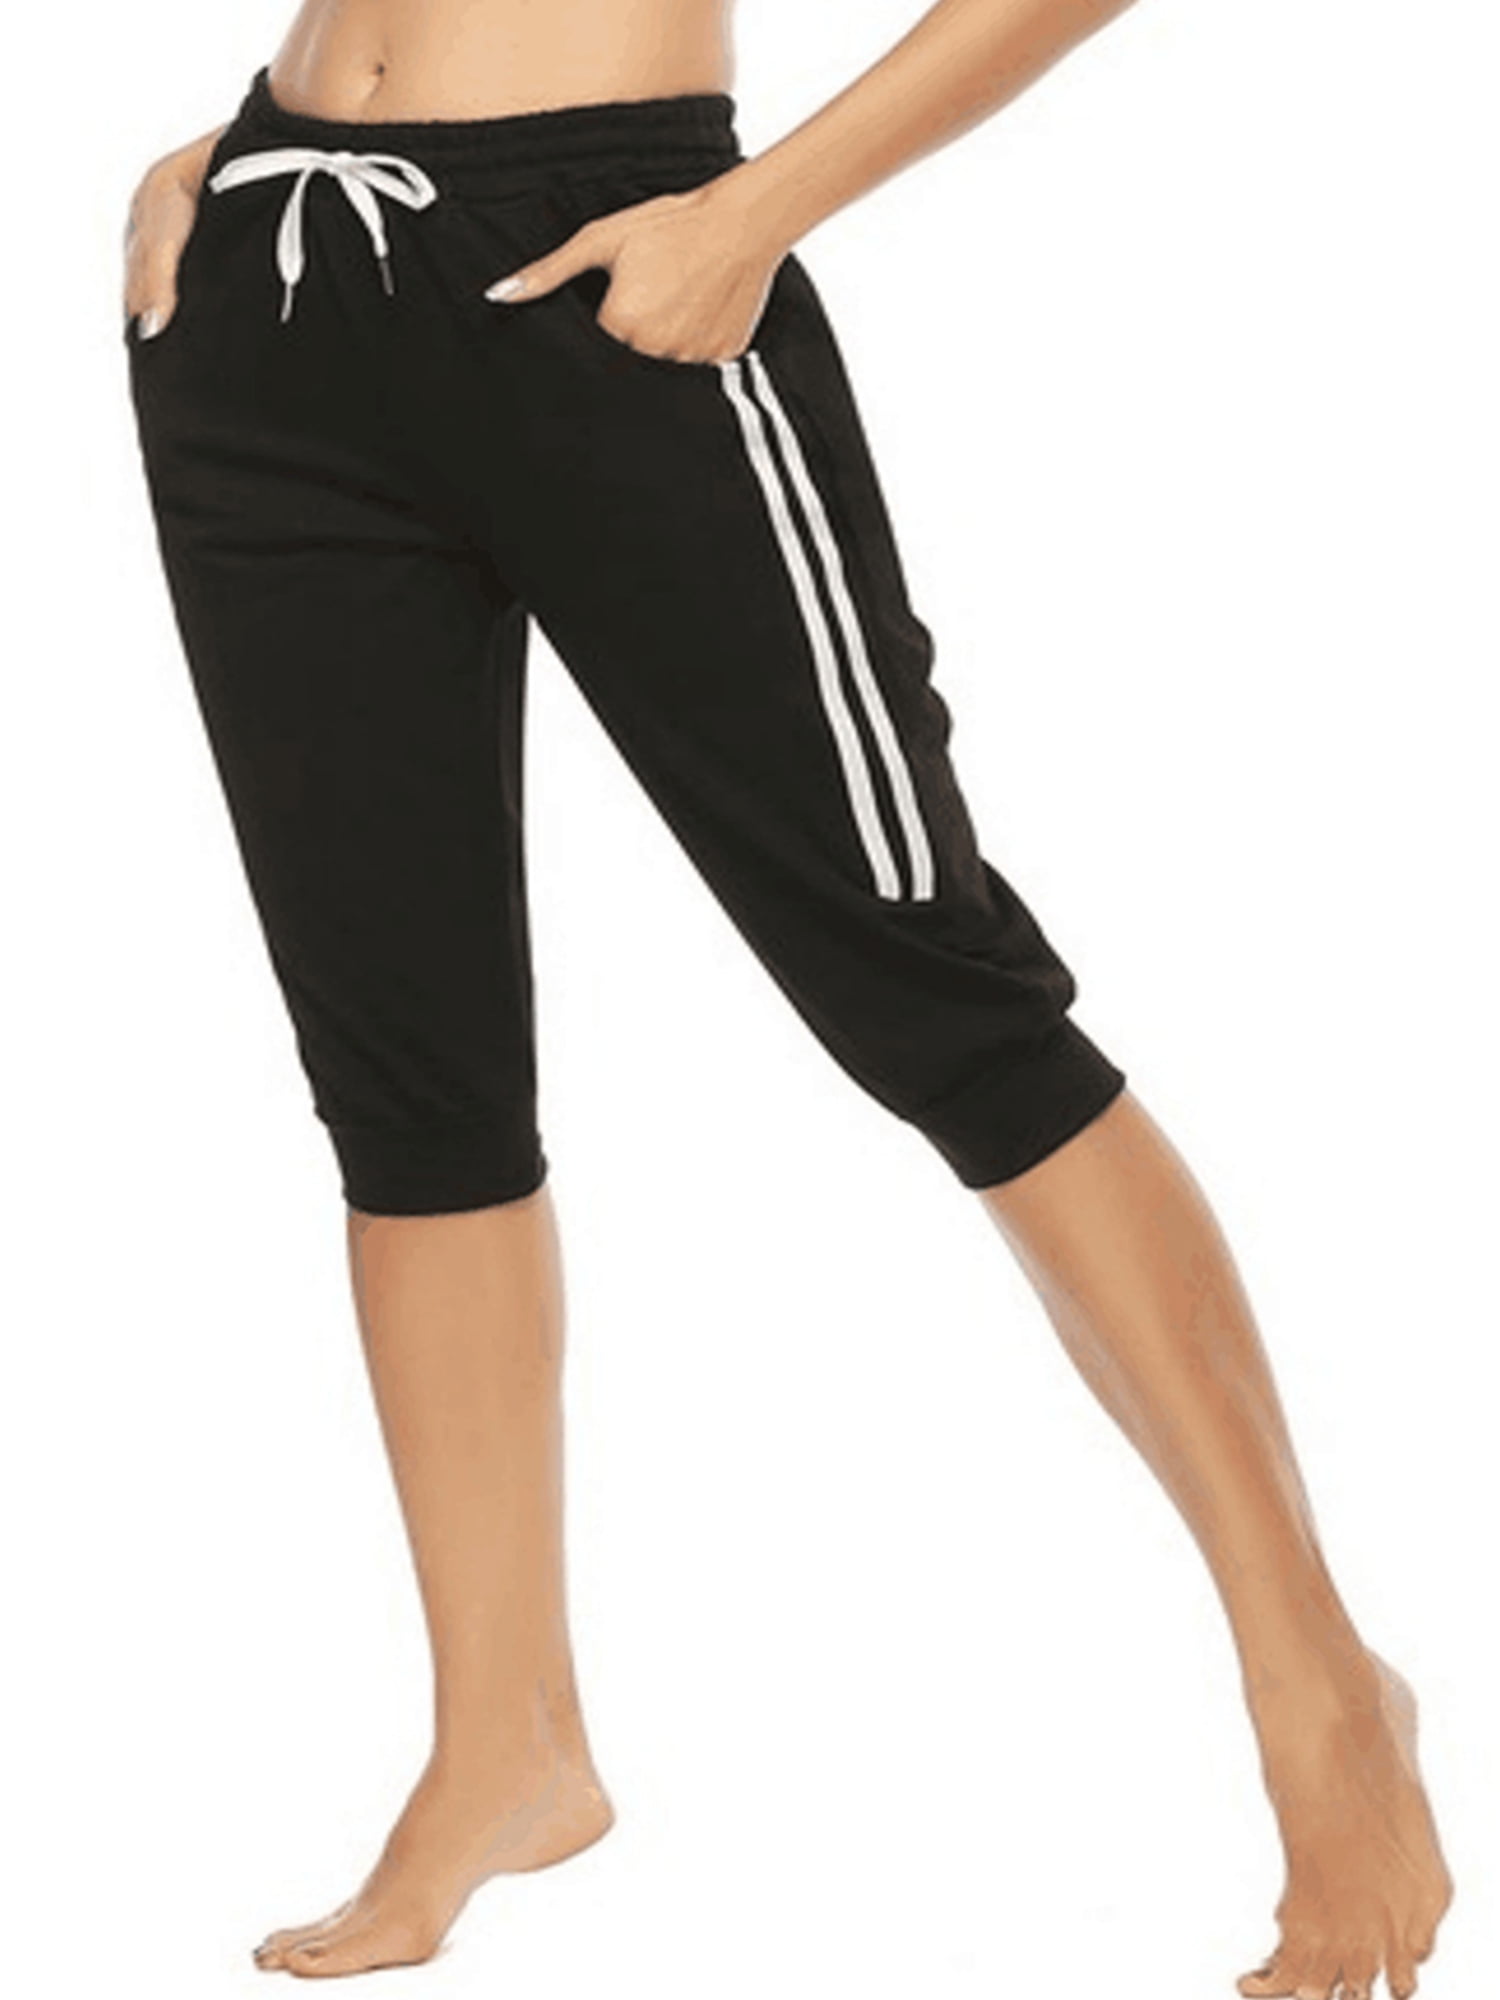 Lounge Loose Drawstring Pants with Side Pockets for Yoga Running Fitness 3/4 Length Jogging Capri Trousers Wayleb Women's Sweatpants Cropped Jogger Sports Pants Summer Casual Fit Tracksuit Bottoms 